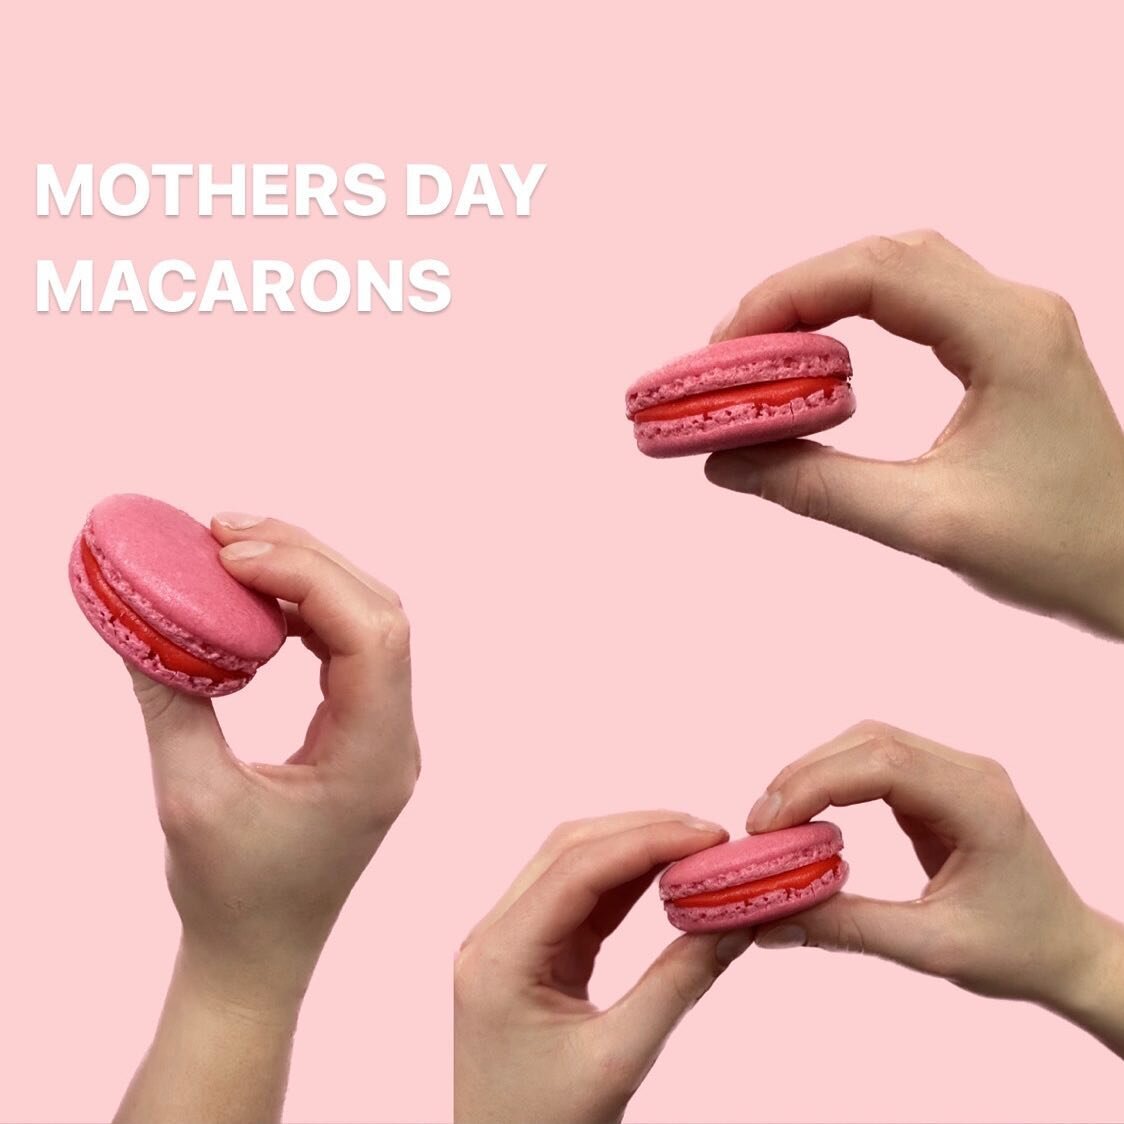 Mother&rsquo;s Day Macarons ❤️ 

6 pack of handcrafted macarons with chocolate ganache - $25 

Get your order in today 
https://www.boatshedcatering.co.nz/macarons